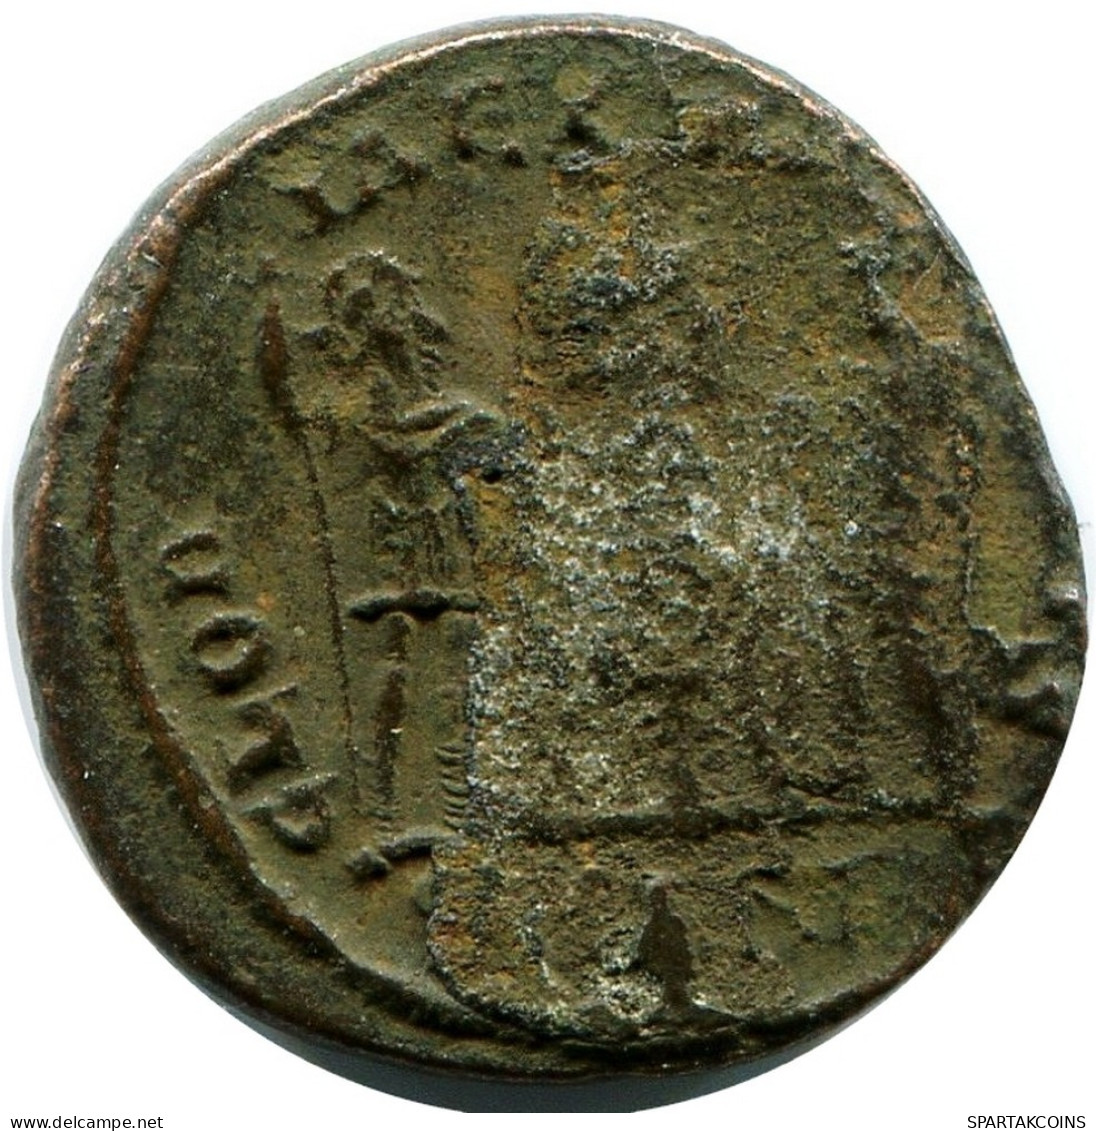 ROMAN Pièce MINTED IN ANTIOCH FROM THE ROYAL ONTARIO MUSEUM #ANC11305.14.F.A - El Impero Christiano (307 / 363)